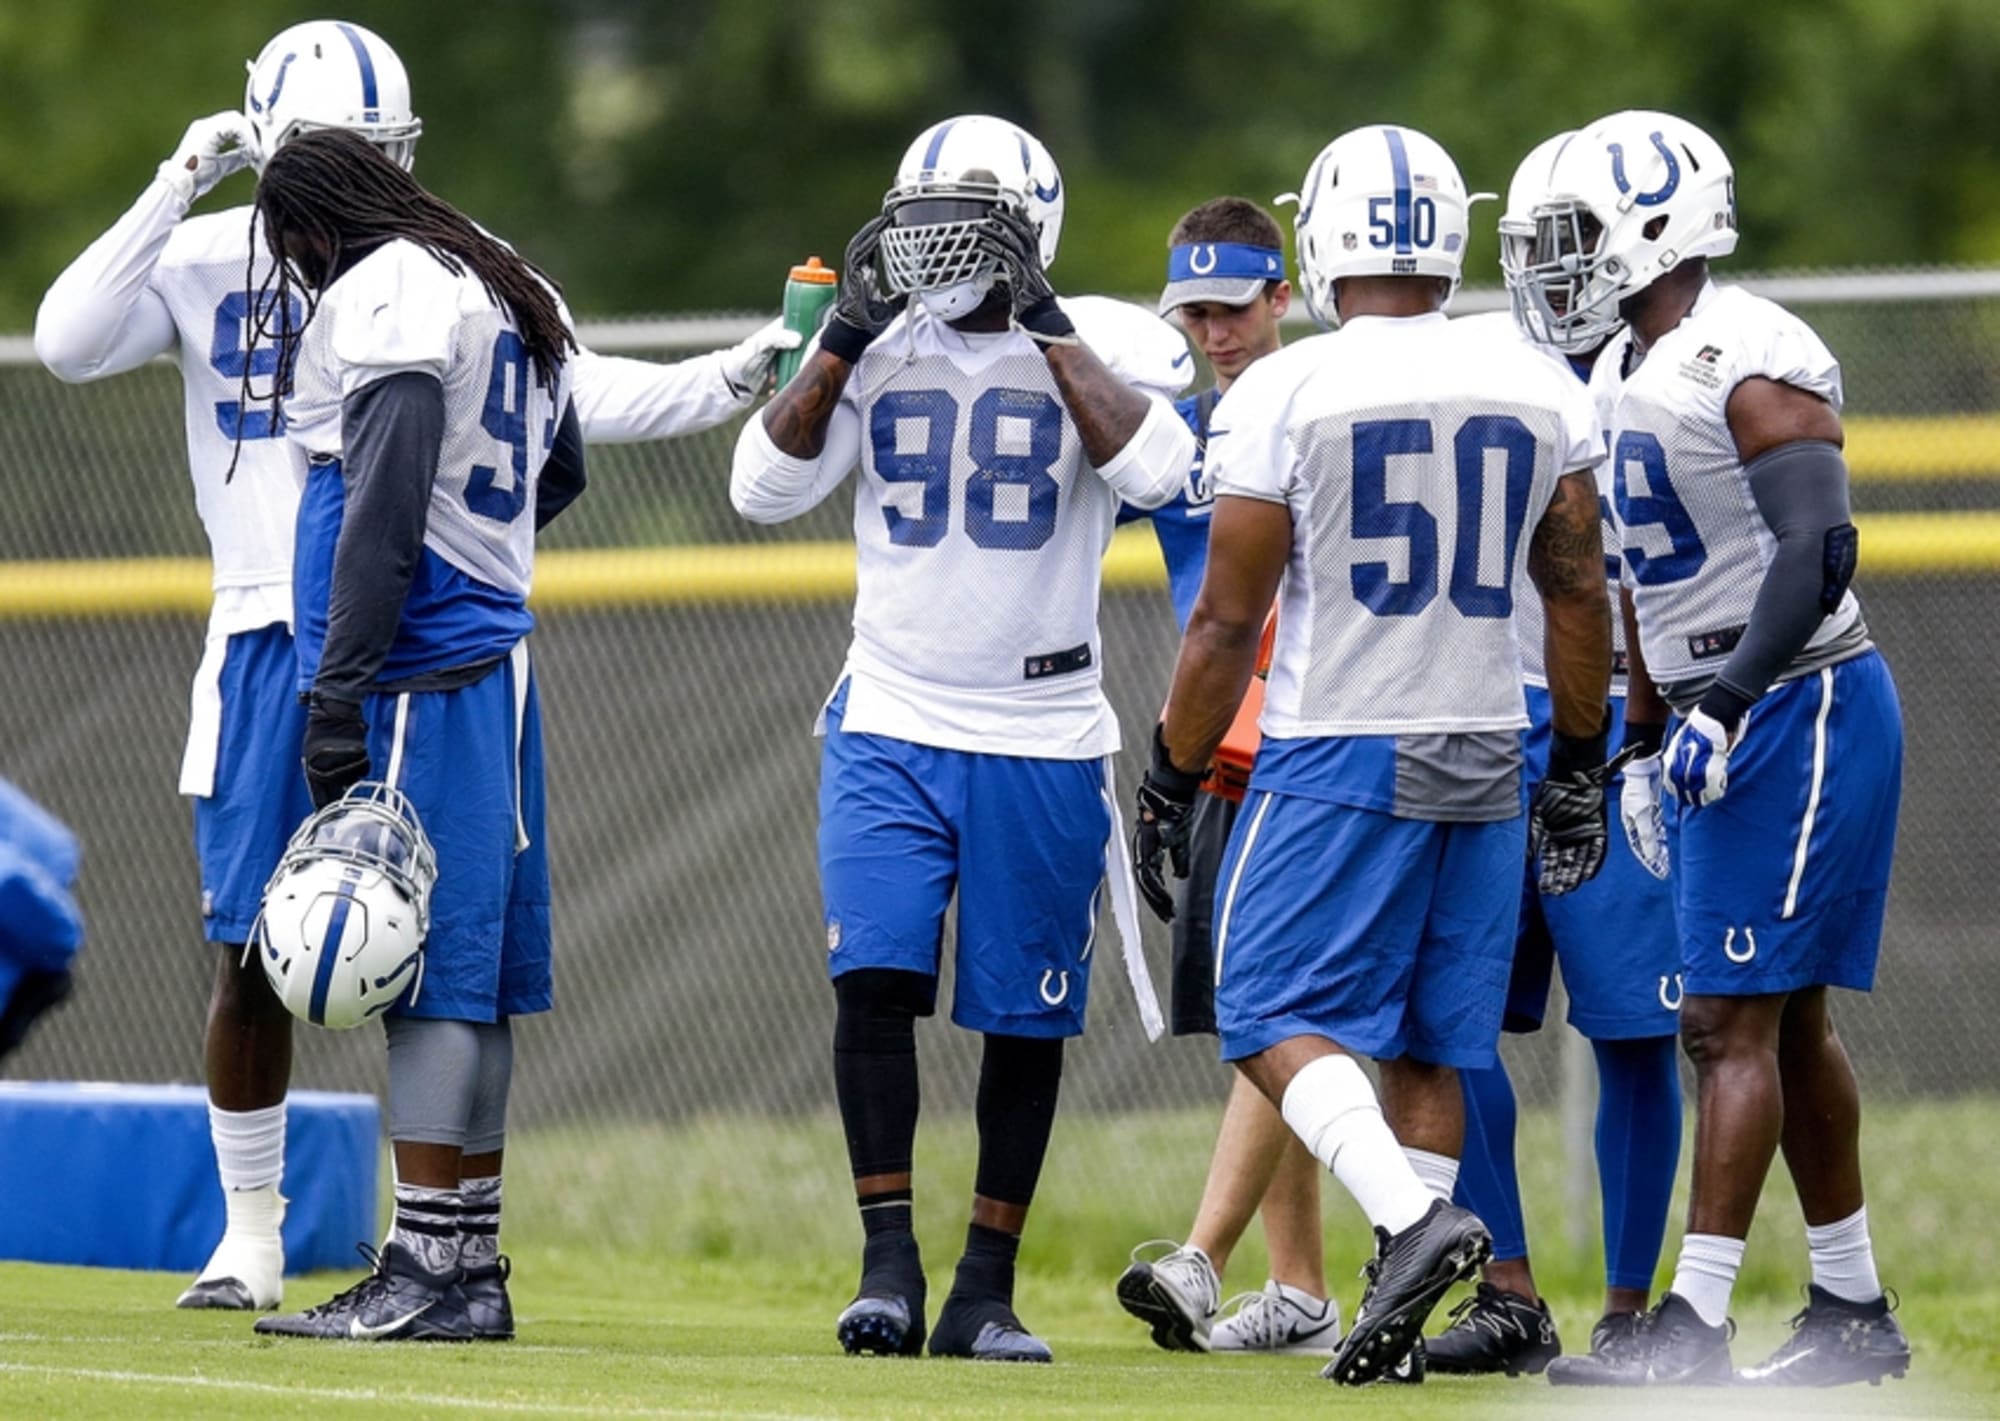 Indianapolis Colts Starters to Play in First Preseason Game